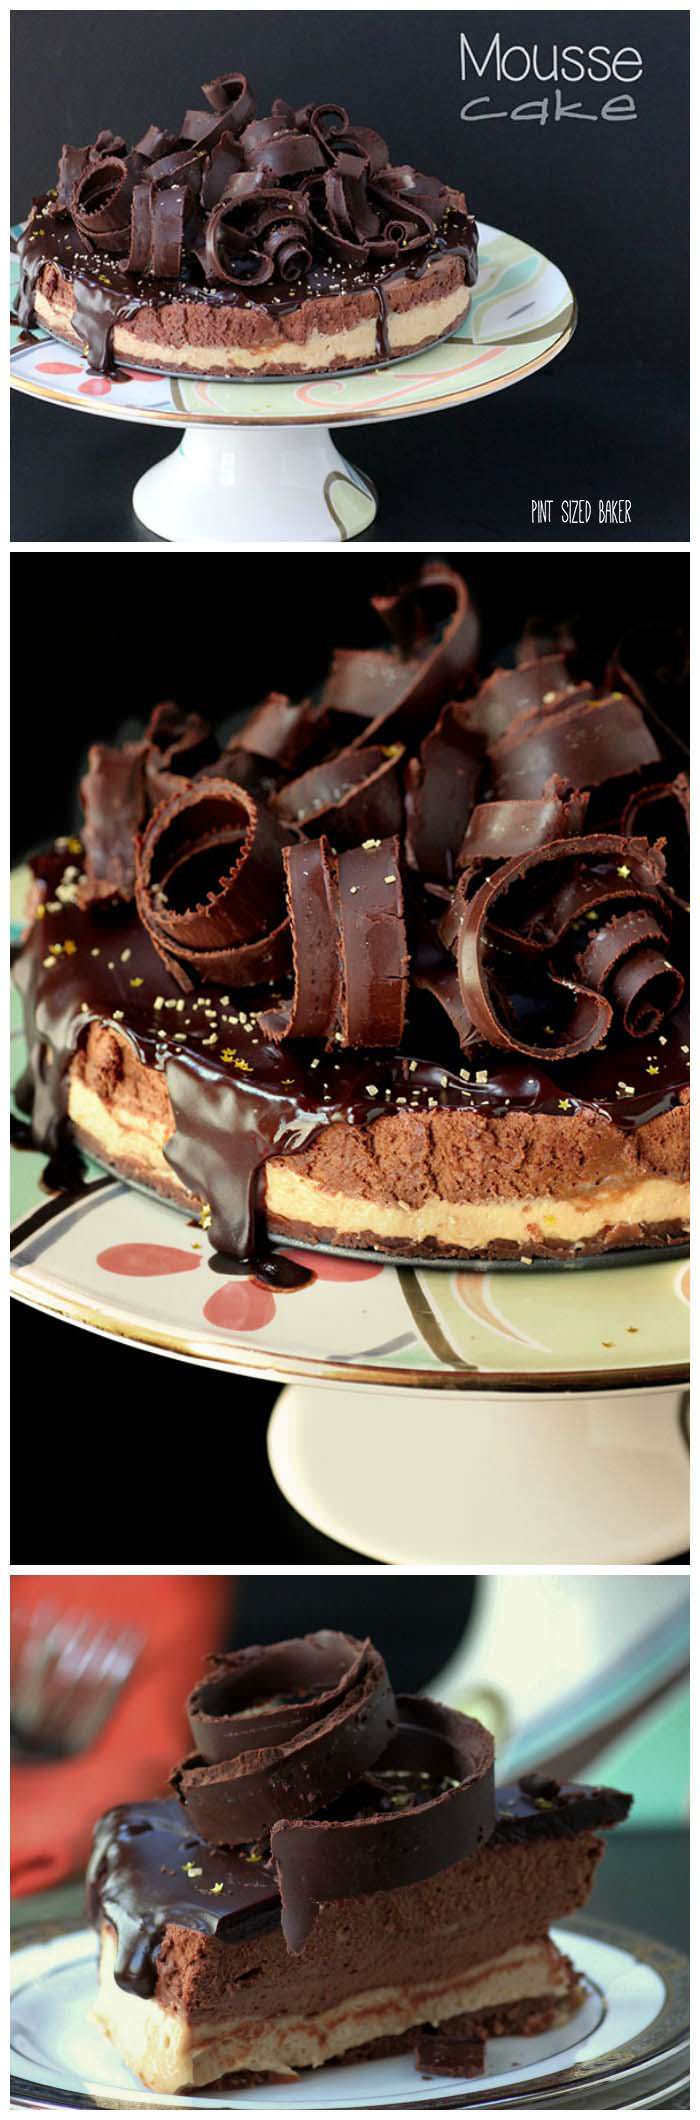 A decadent dessert. Chocolate Shortbread Cookie base, two types of mousse layers, and chocolate curls for days! This Mousse Cake will be a hit at your dinner party.